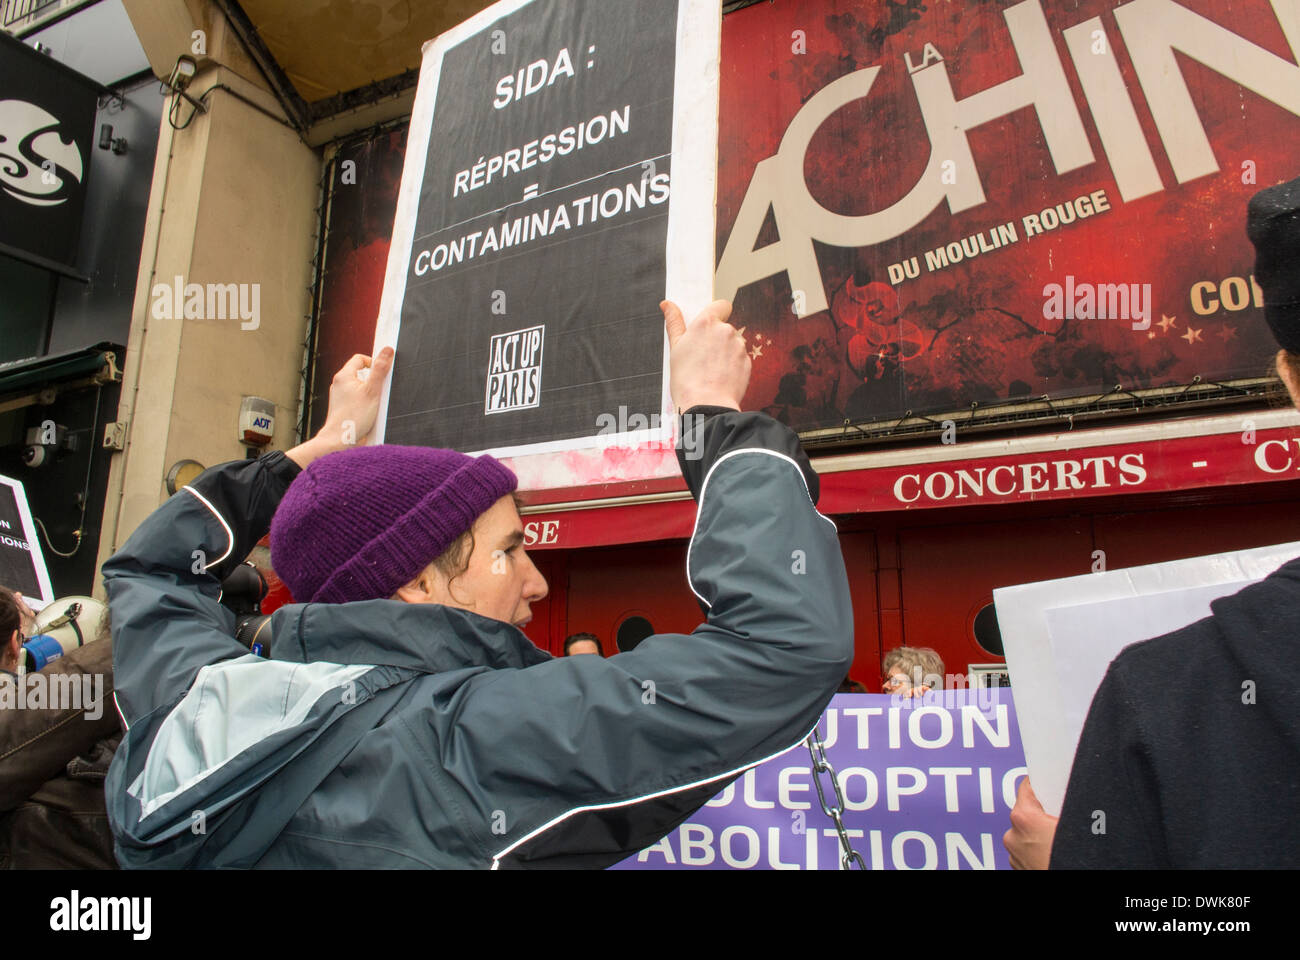 European Activists Group, ACT UP Demonstrators, Protesting at Moulin Rouge, Against Anti-Prostitution Meeting by Feminist Groups, woman protesting, Holding Protest Sign from Behind, ACT UP aids protests Stock Photo